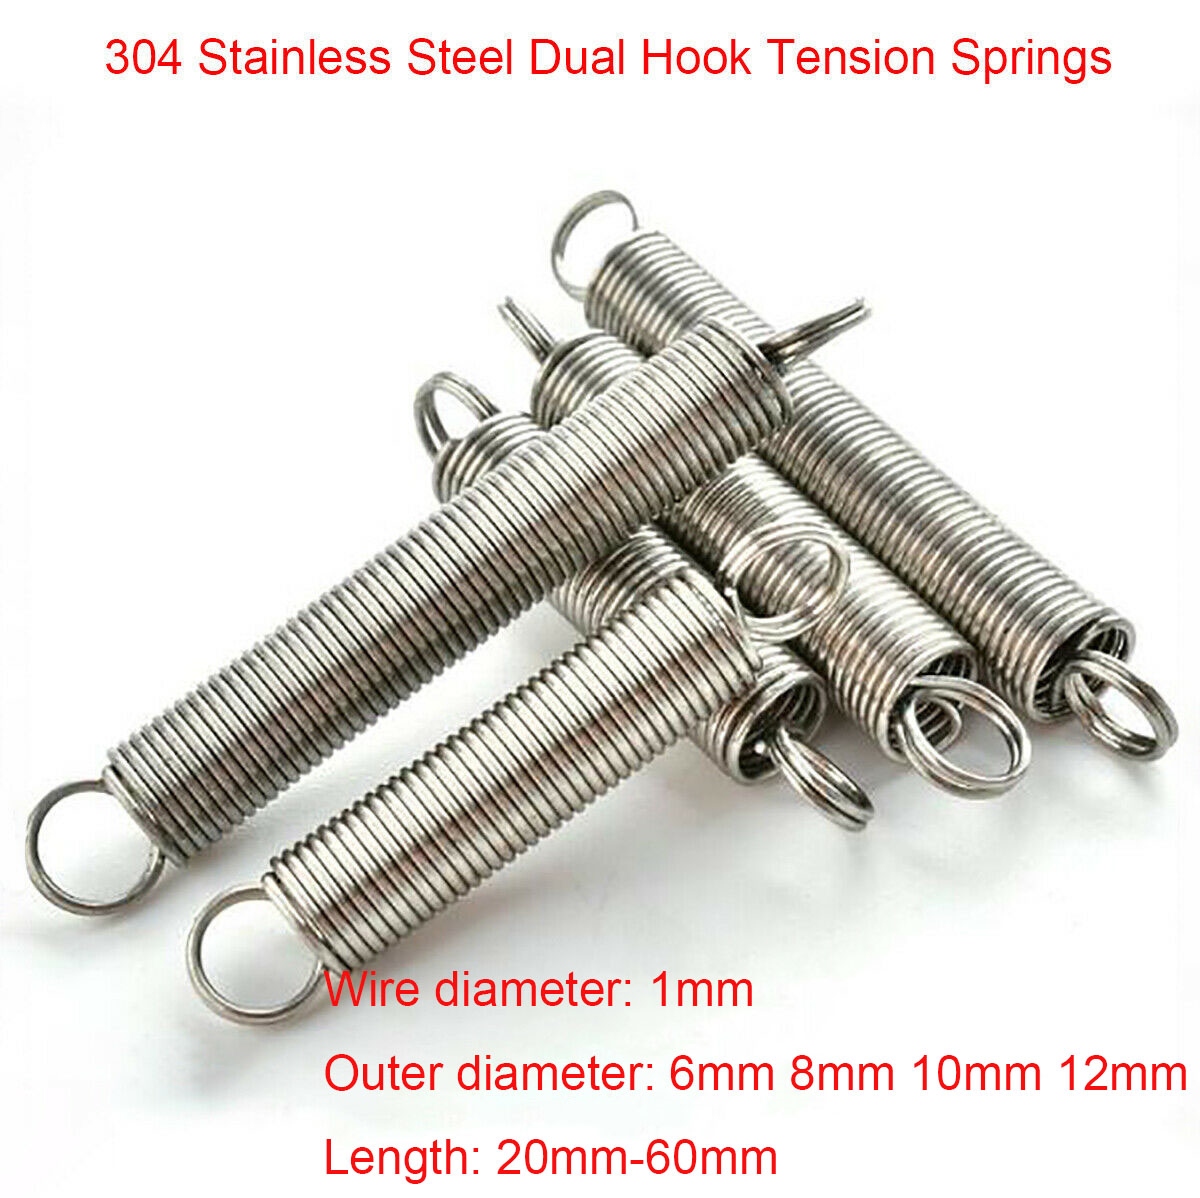 M1.5 A2 304 STAINLESS SPRING TENSION PINS SPLIT DOWEL SELLOCK ROLL PINS 1.5MM 